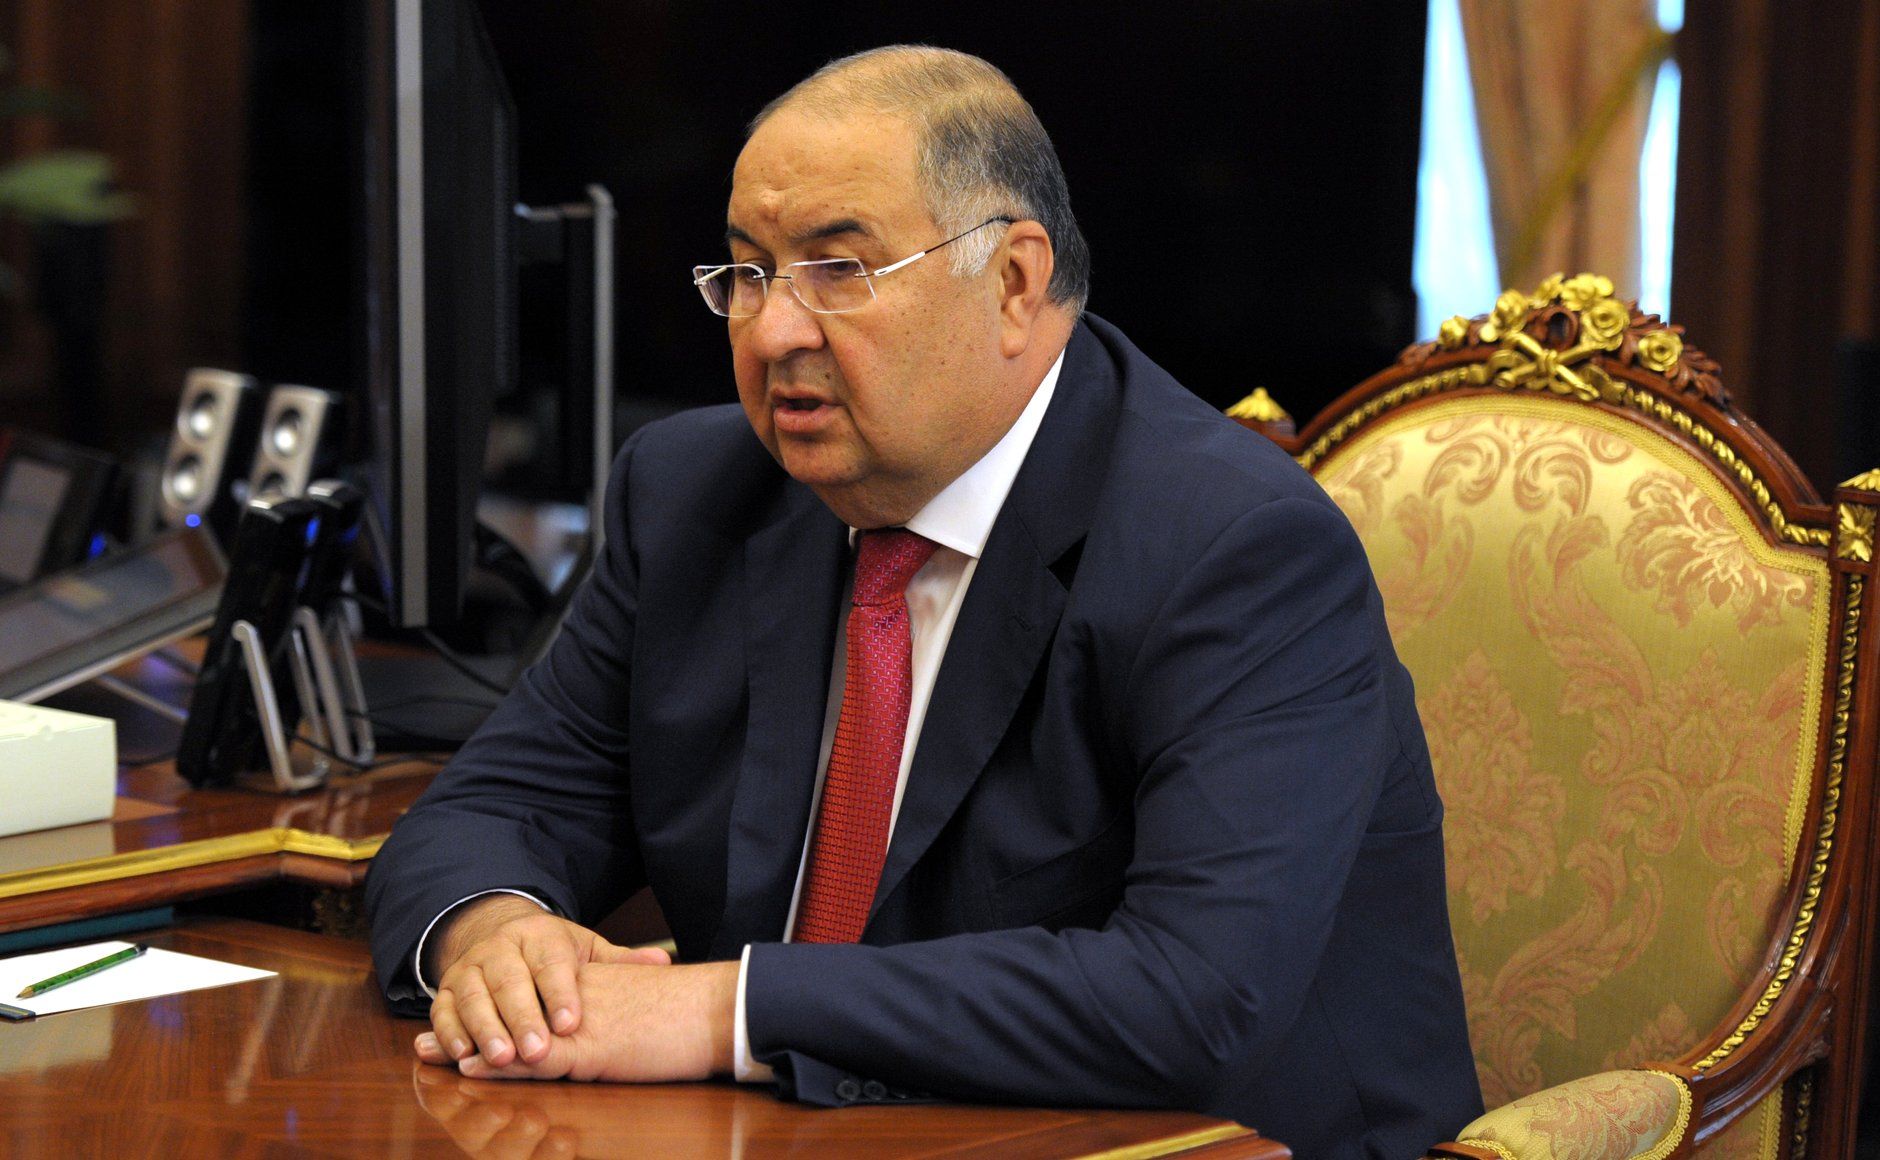 8-intriguing-facts-about-alisher-usmanov